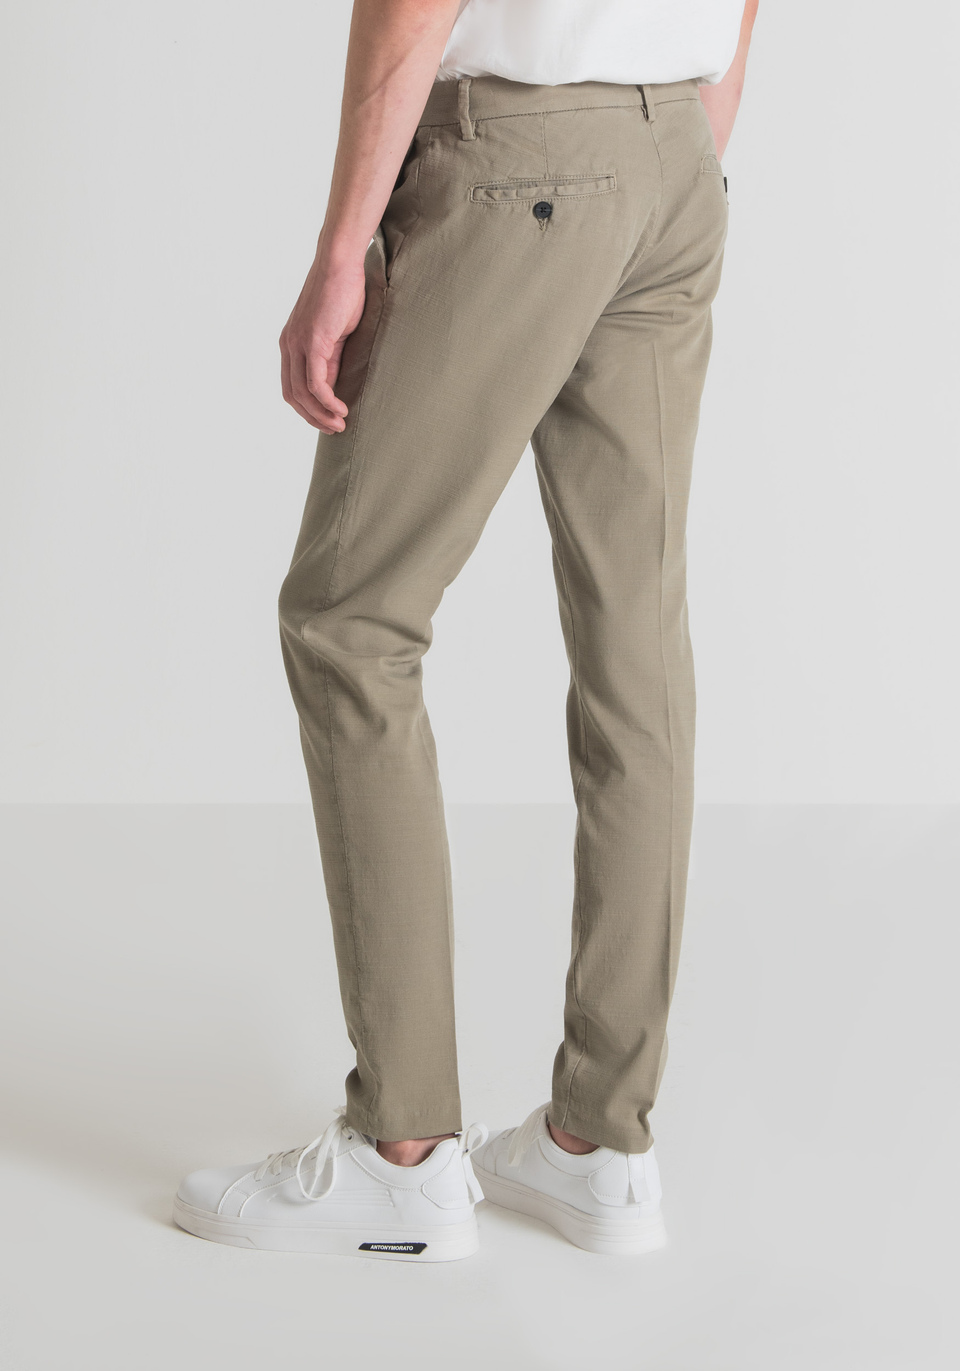 "BRYAN" SKINNY-FIT TROUSERS IN MICRO-WEAVE STRETCH COTTON - Antony Morato Online Shop